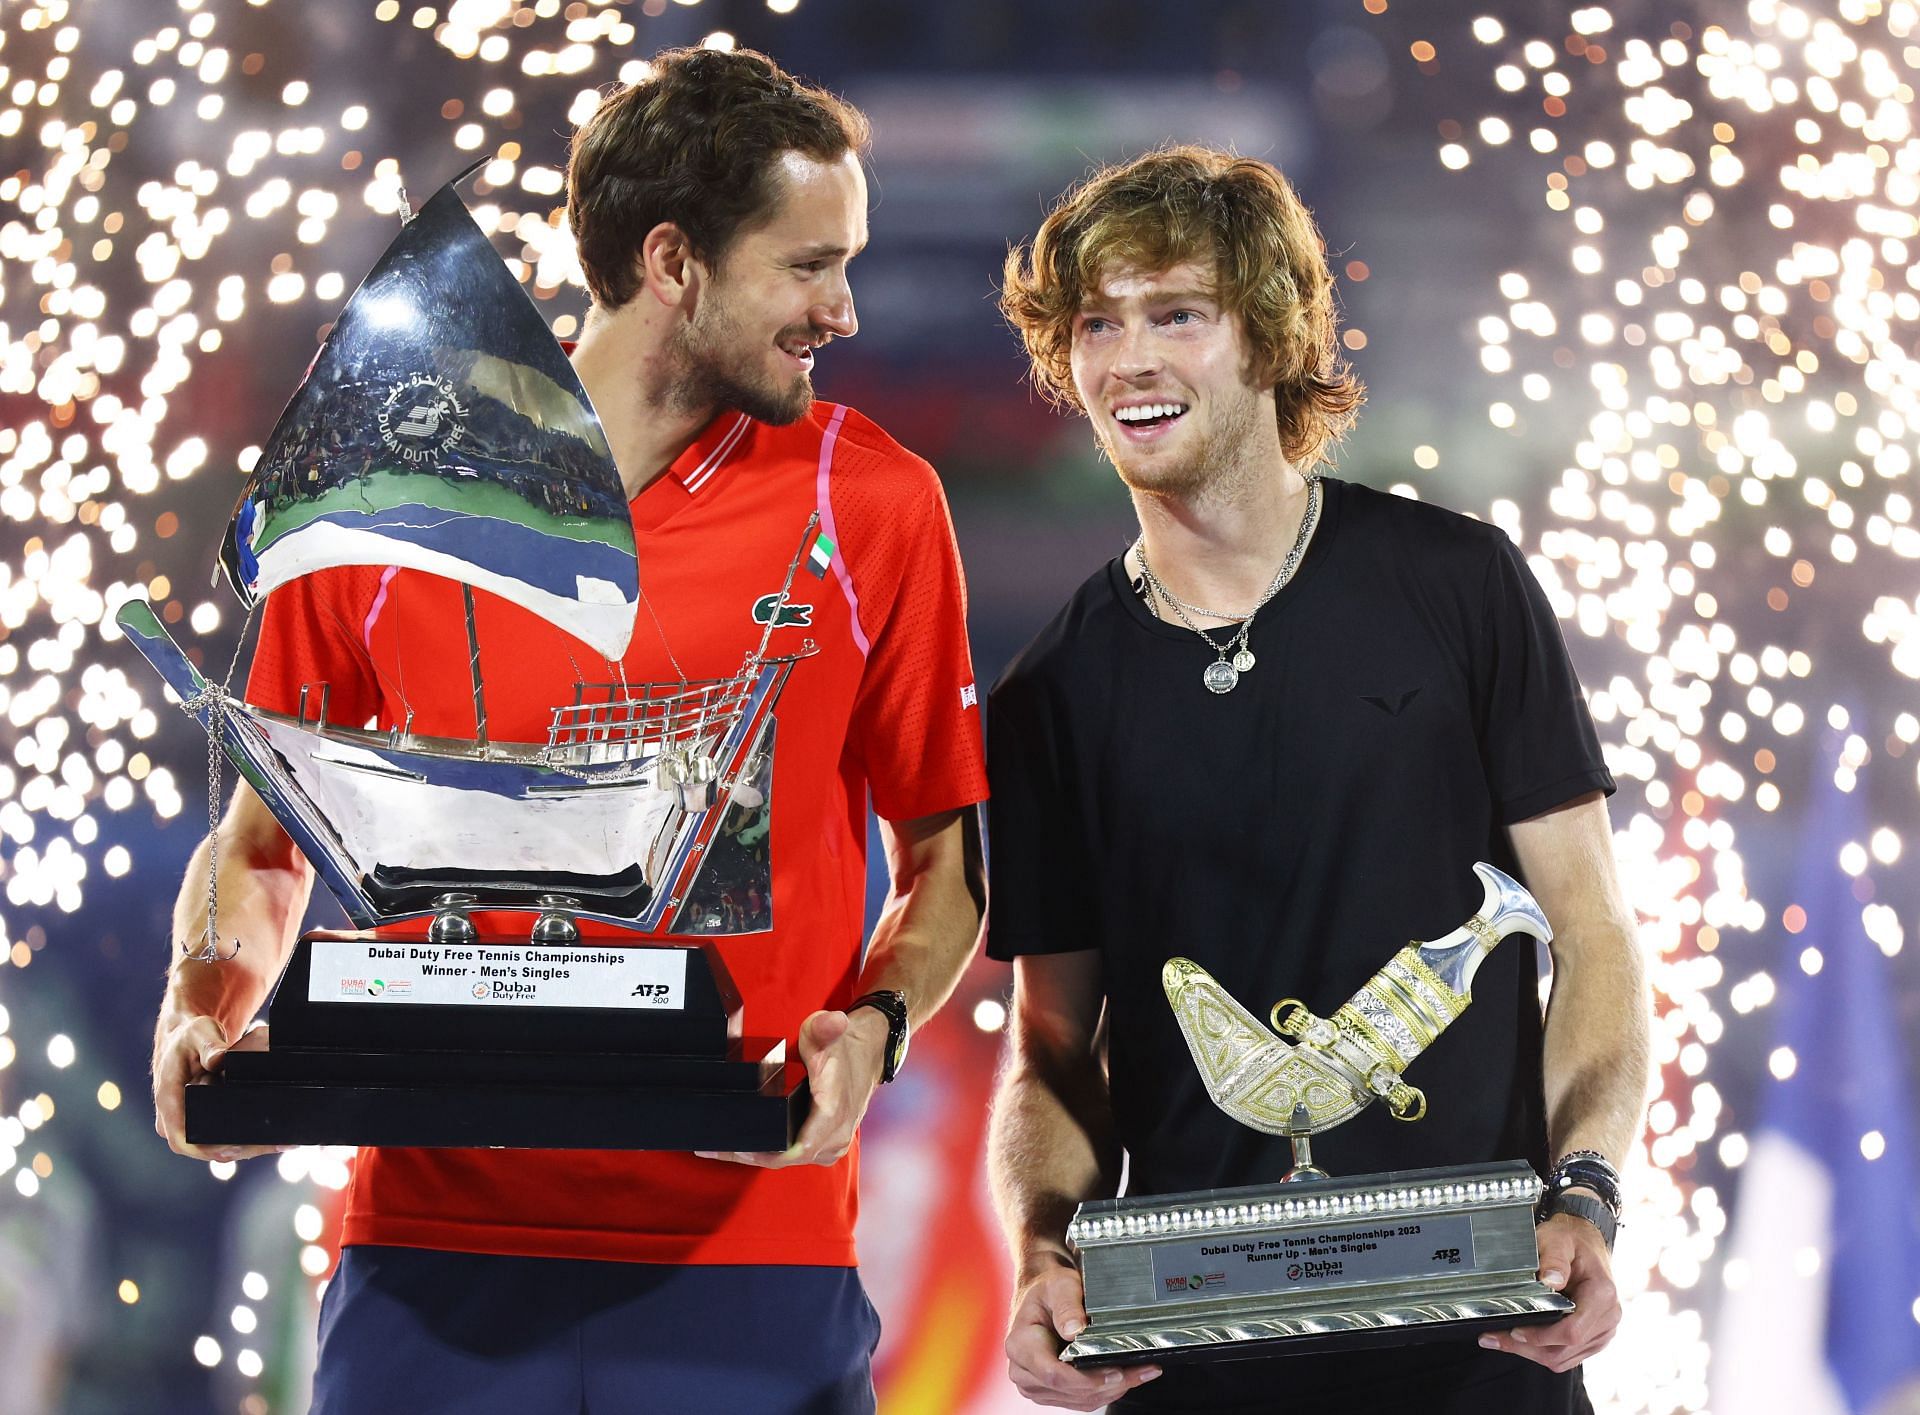 Daniil Medvedev and Andrey Rublev at the Dubai Tennis Championships